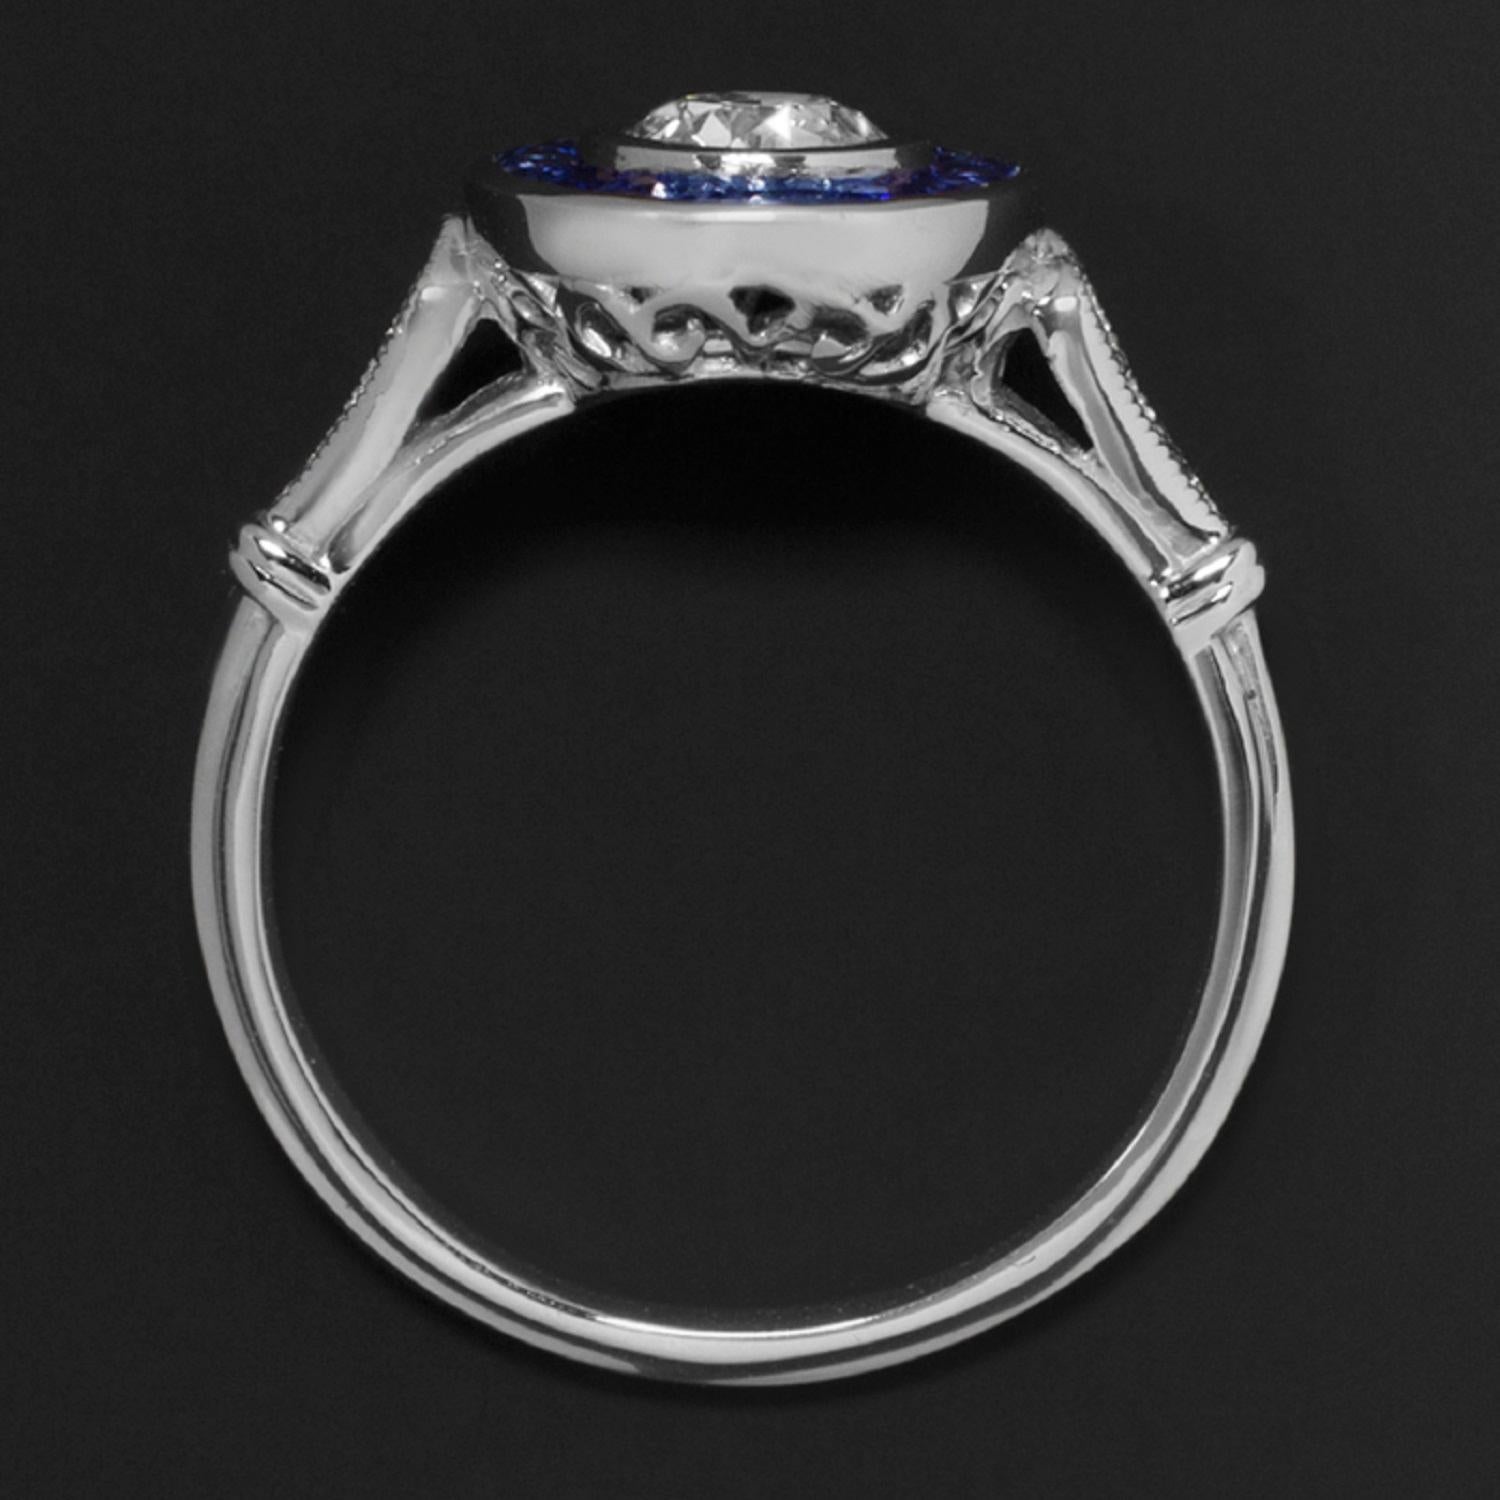 Art Deco style ring features a very high quality ½ carat old European cut diamond surrounded by a glamorous ring of royal blue natural sapphires. Bright white and completely eye clean, the GIA certified F SI1 diamond is gorgeously vibrant. Cut by